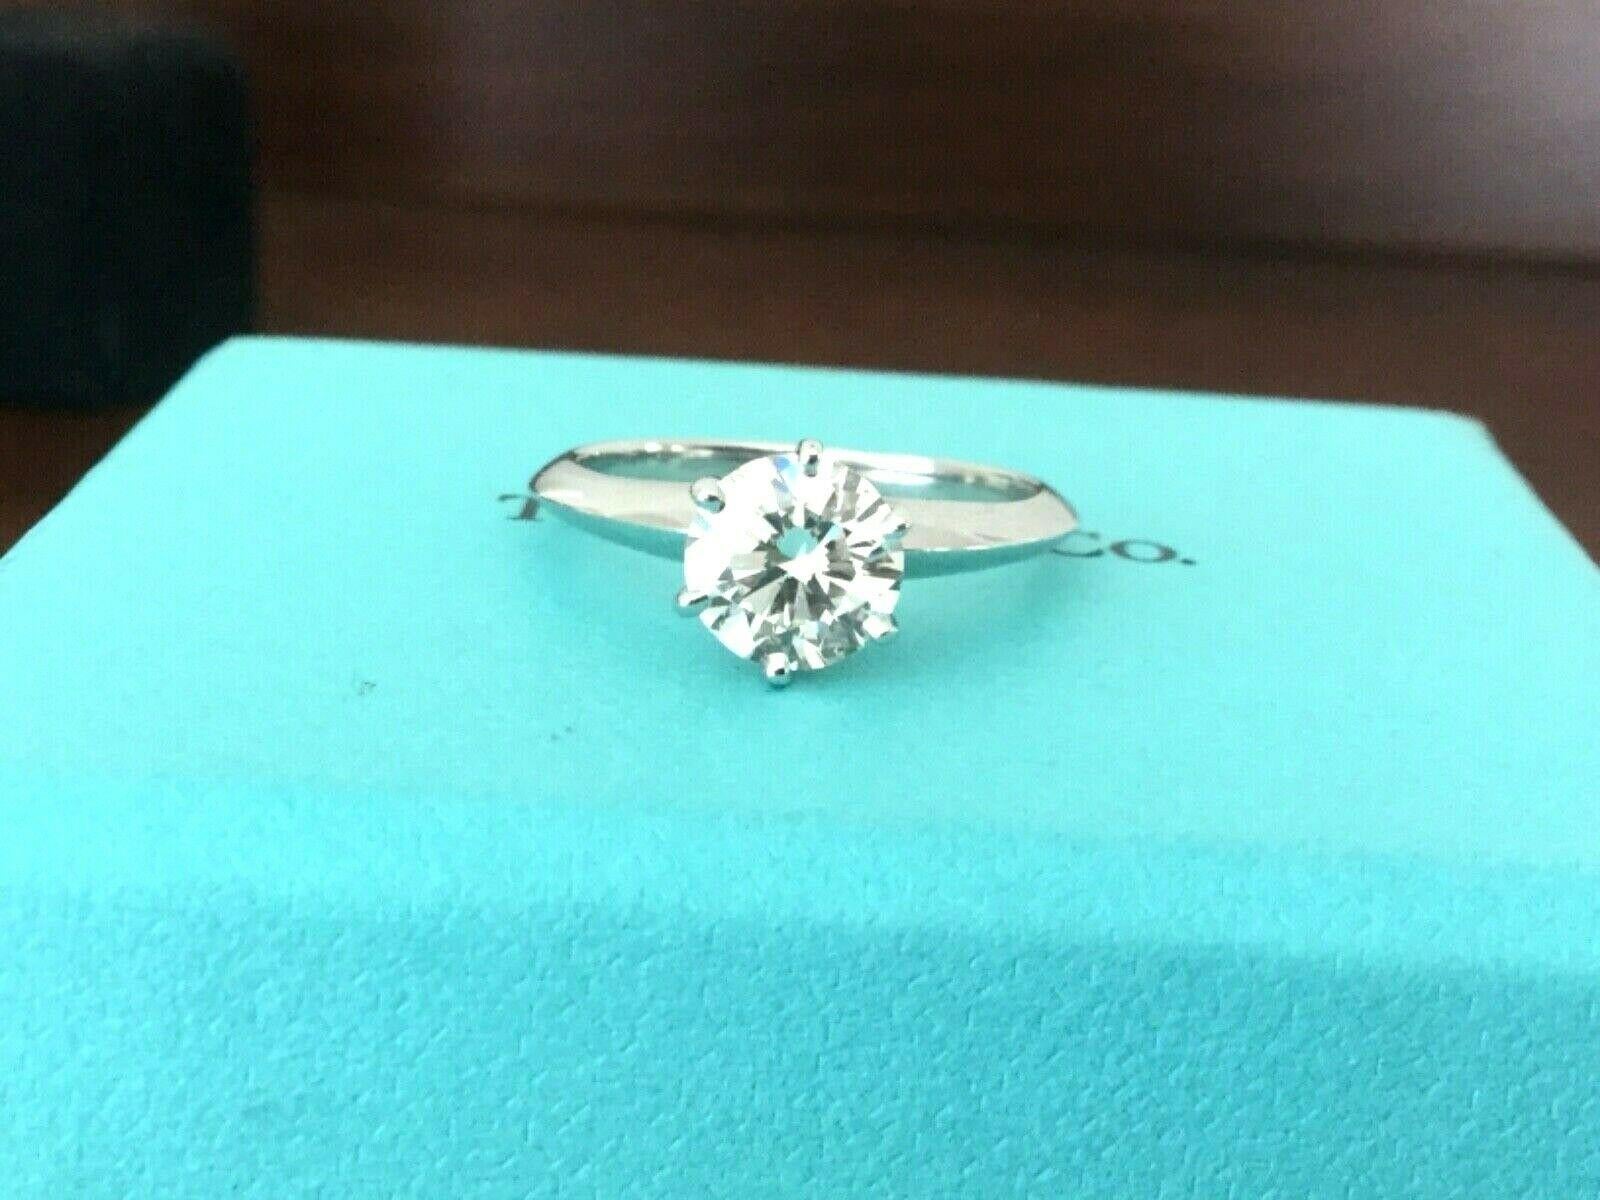 Being offered for your consideration is a like new Tiffany & Co Platinum and Diamond 1.13 carat natural round engagement ring set in the classic 6 prong setting.  This amazing ring was REMOUNTED by Tiffany's into a brand new platinum 6 prong classic